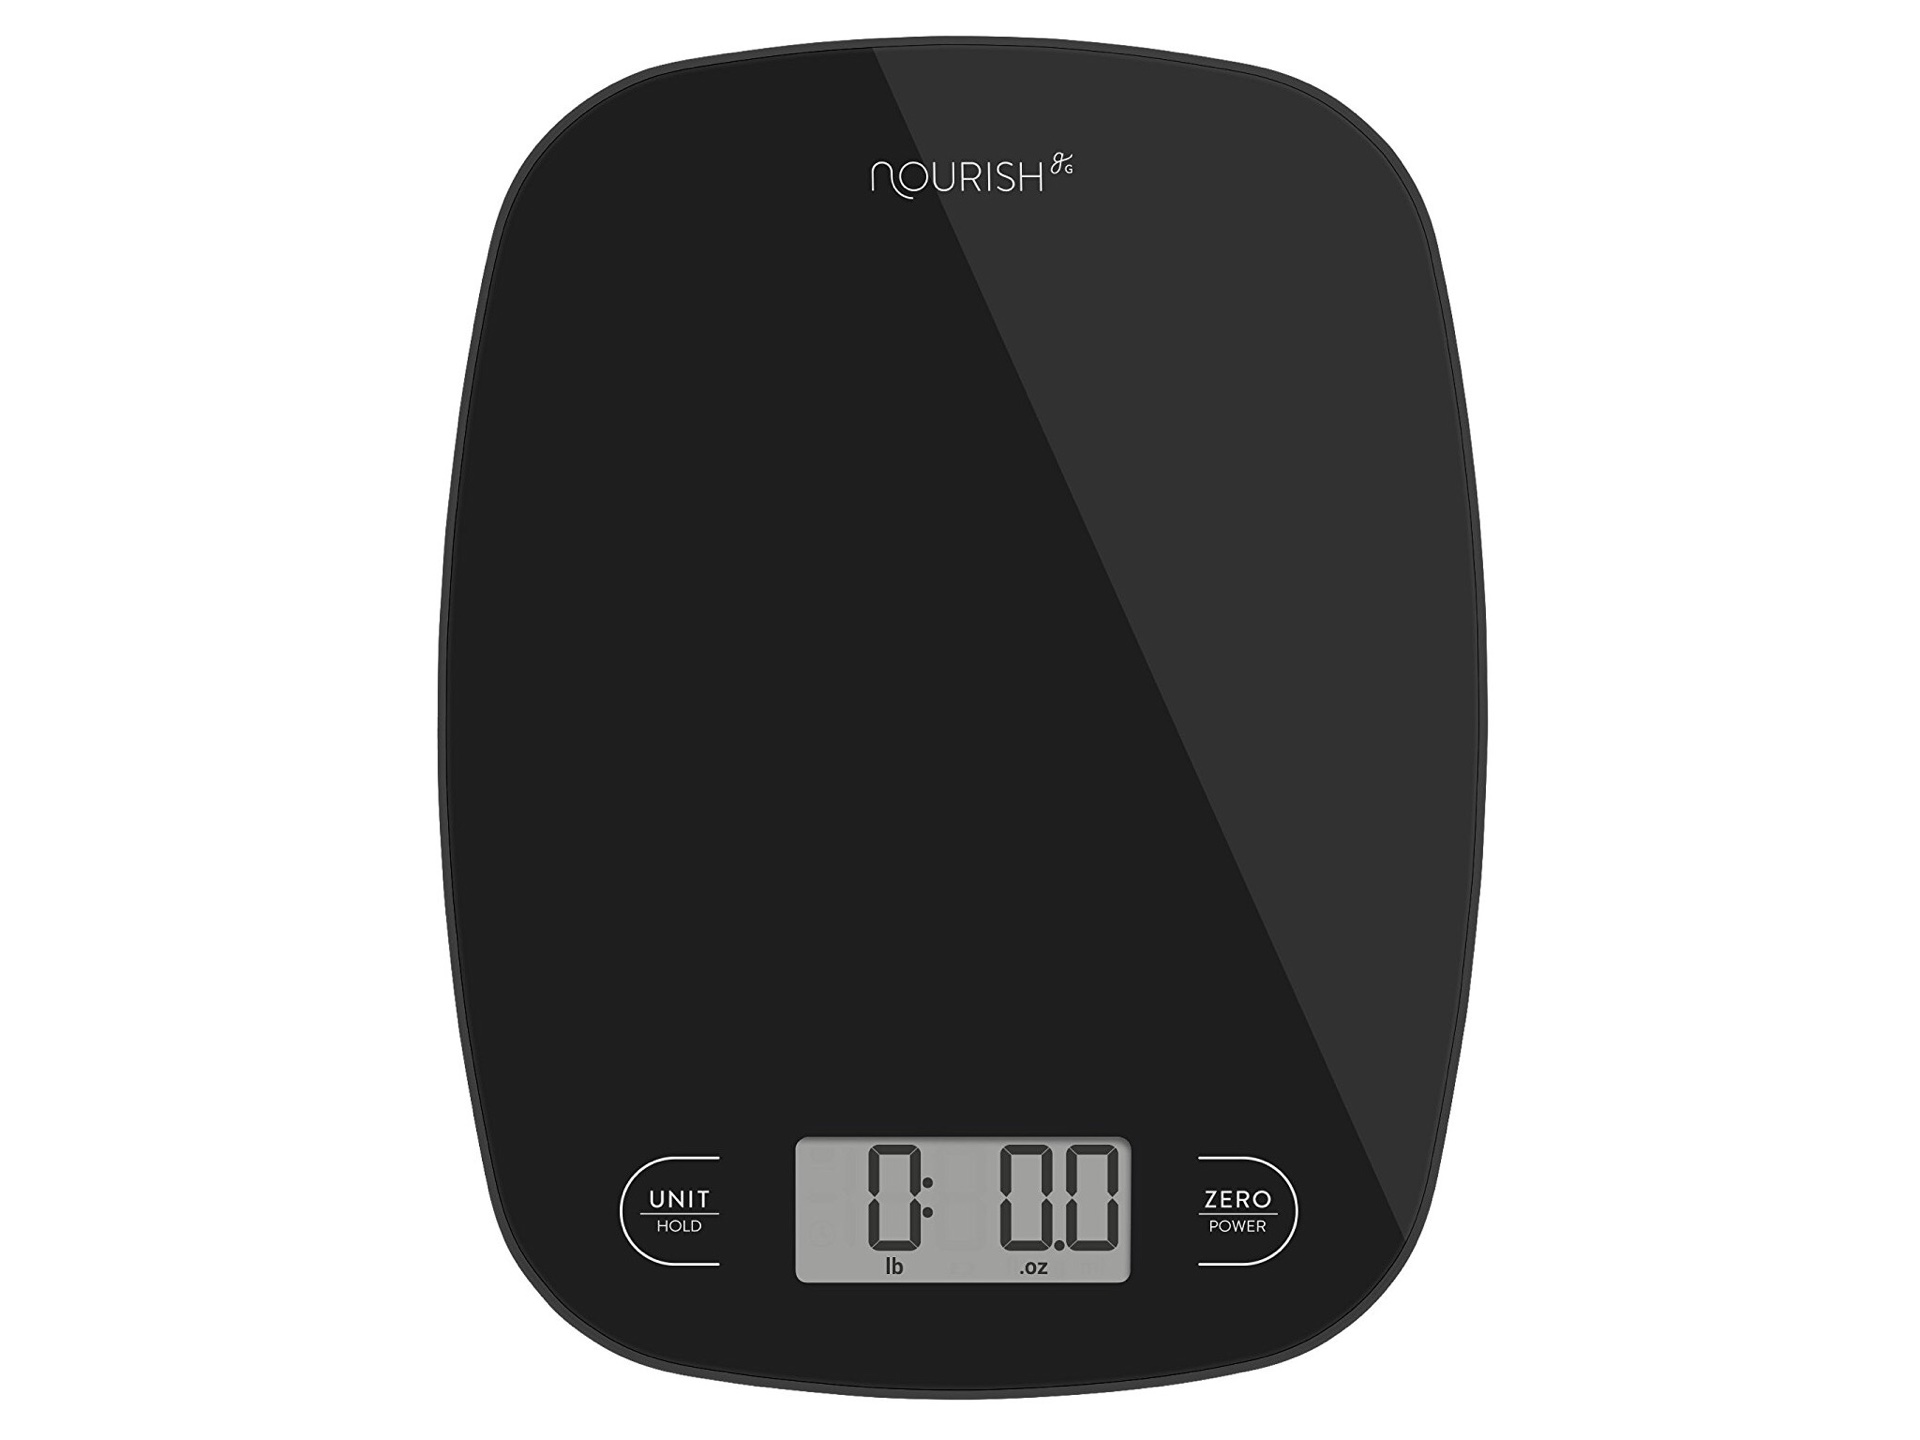 The "Nourish" digital kitchen scale by Greater Goods. ($10–12, depending on color)